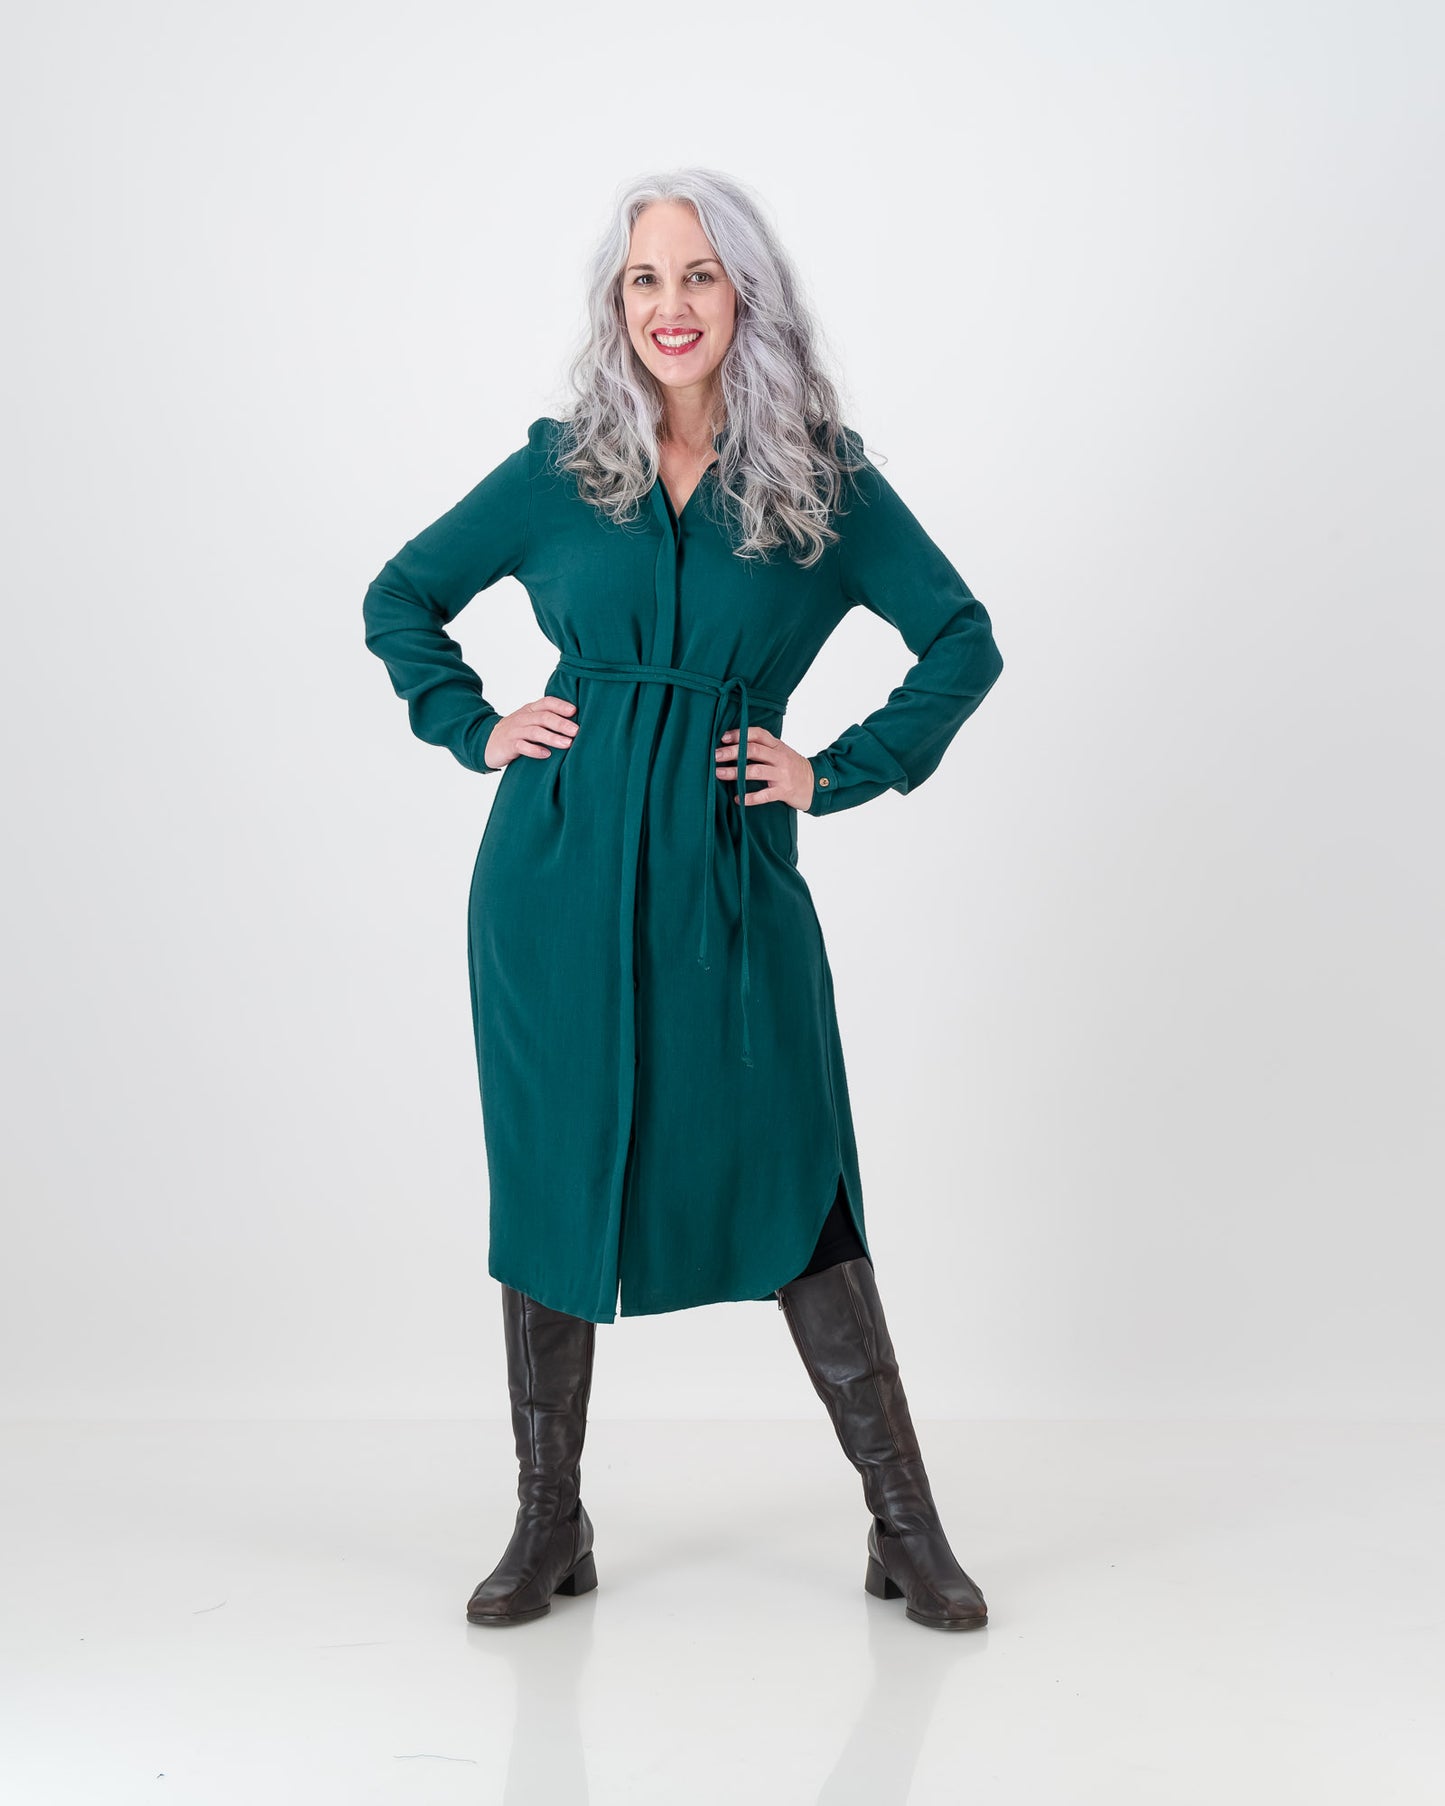 A stunning older woman with long silver hair wears the emerald green imogen dress from LUNAR. The dress is below the knee and has a cinched in waist with a long sleeve and hidden button-stand.